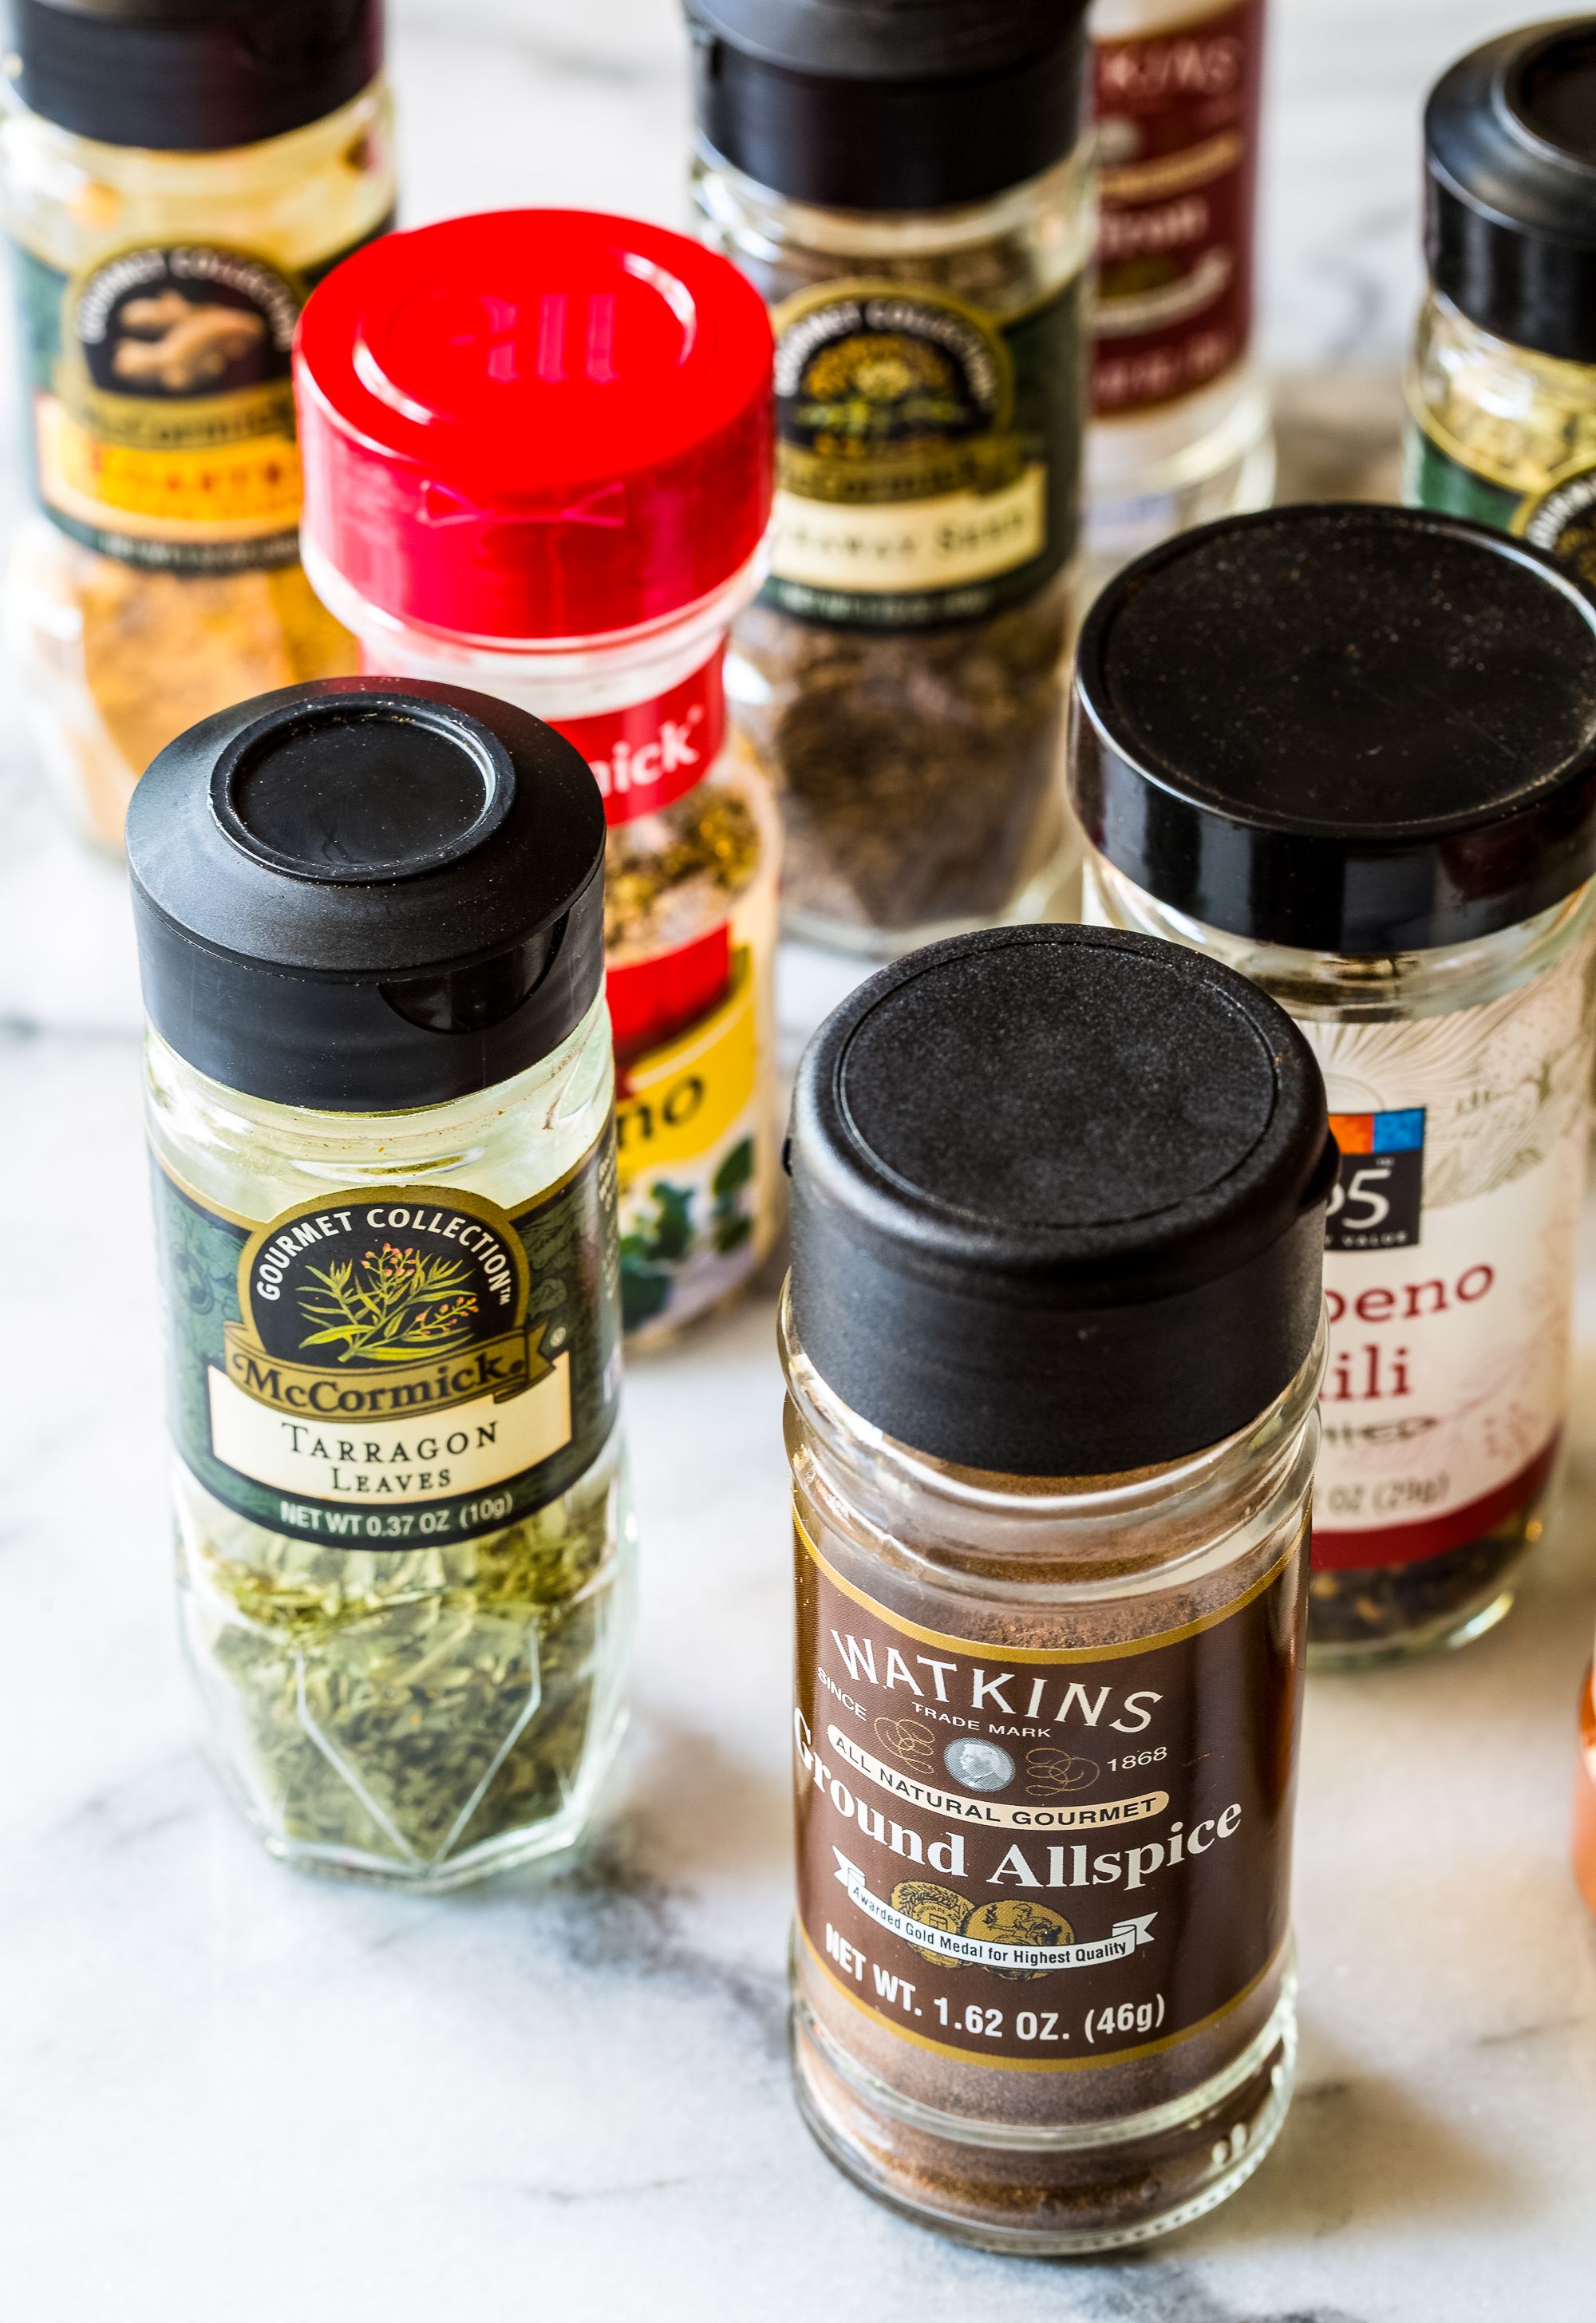 https://hips.hearstapps.com/thepioneerwoman/wp-content/uploads/2016/05/how-to-revive-spices-01.jpg